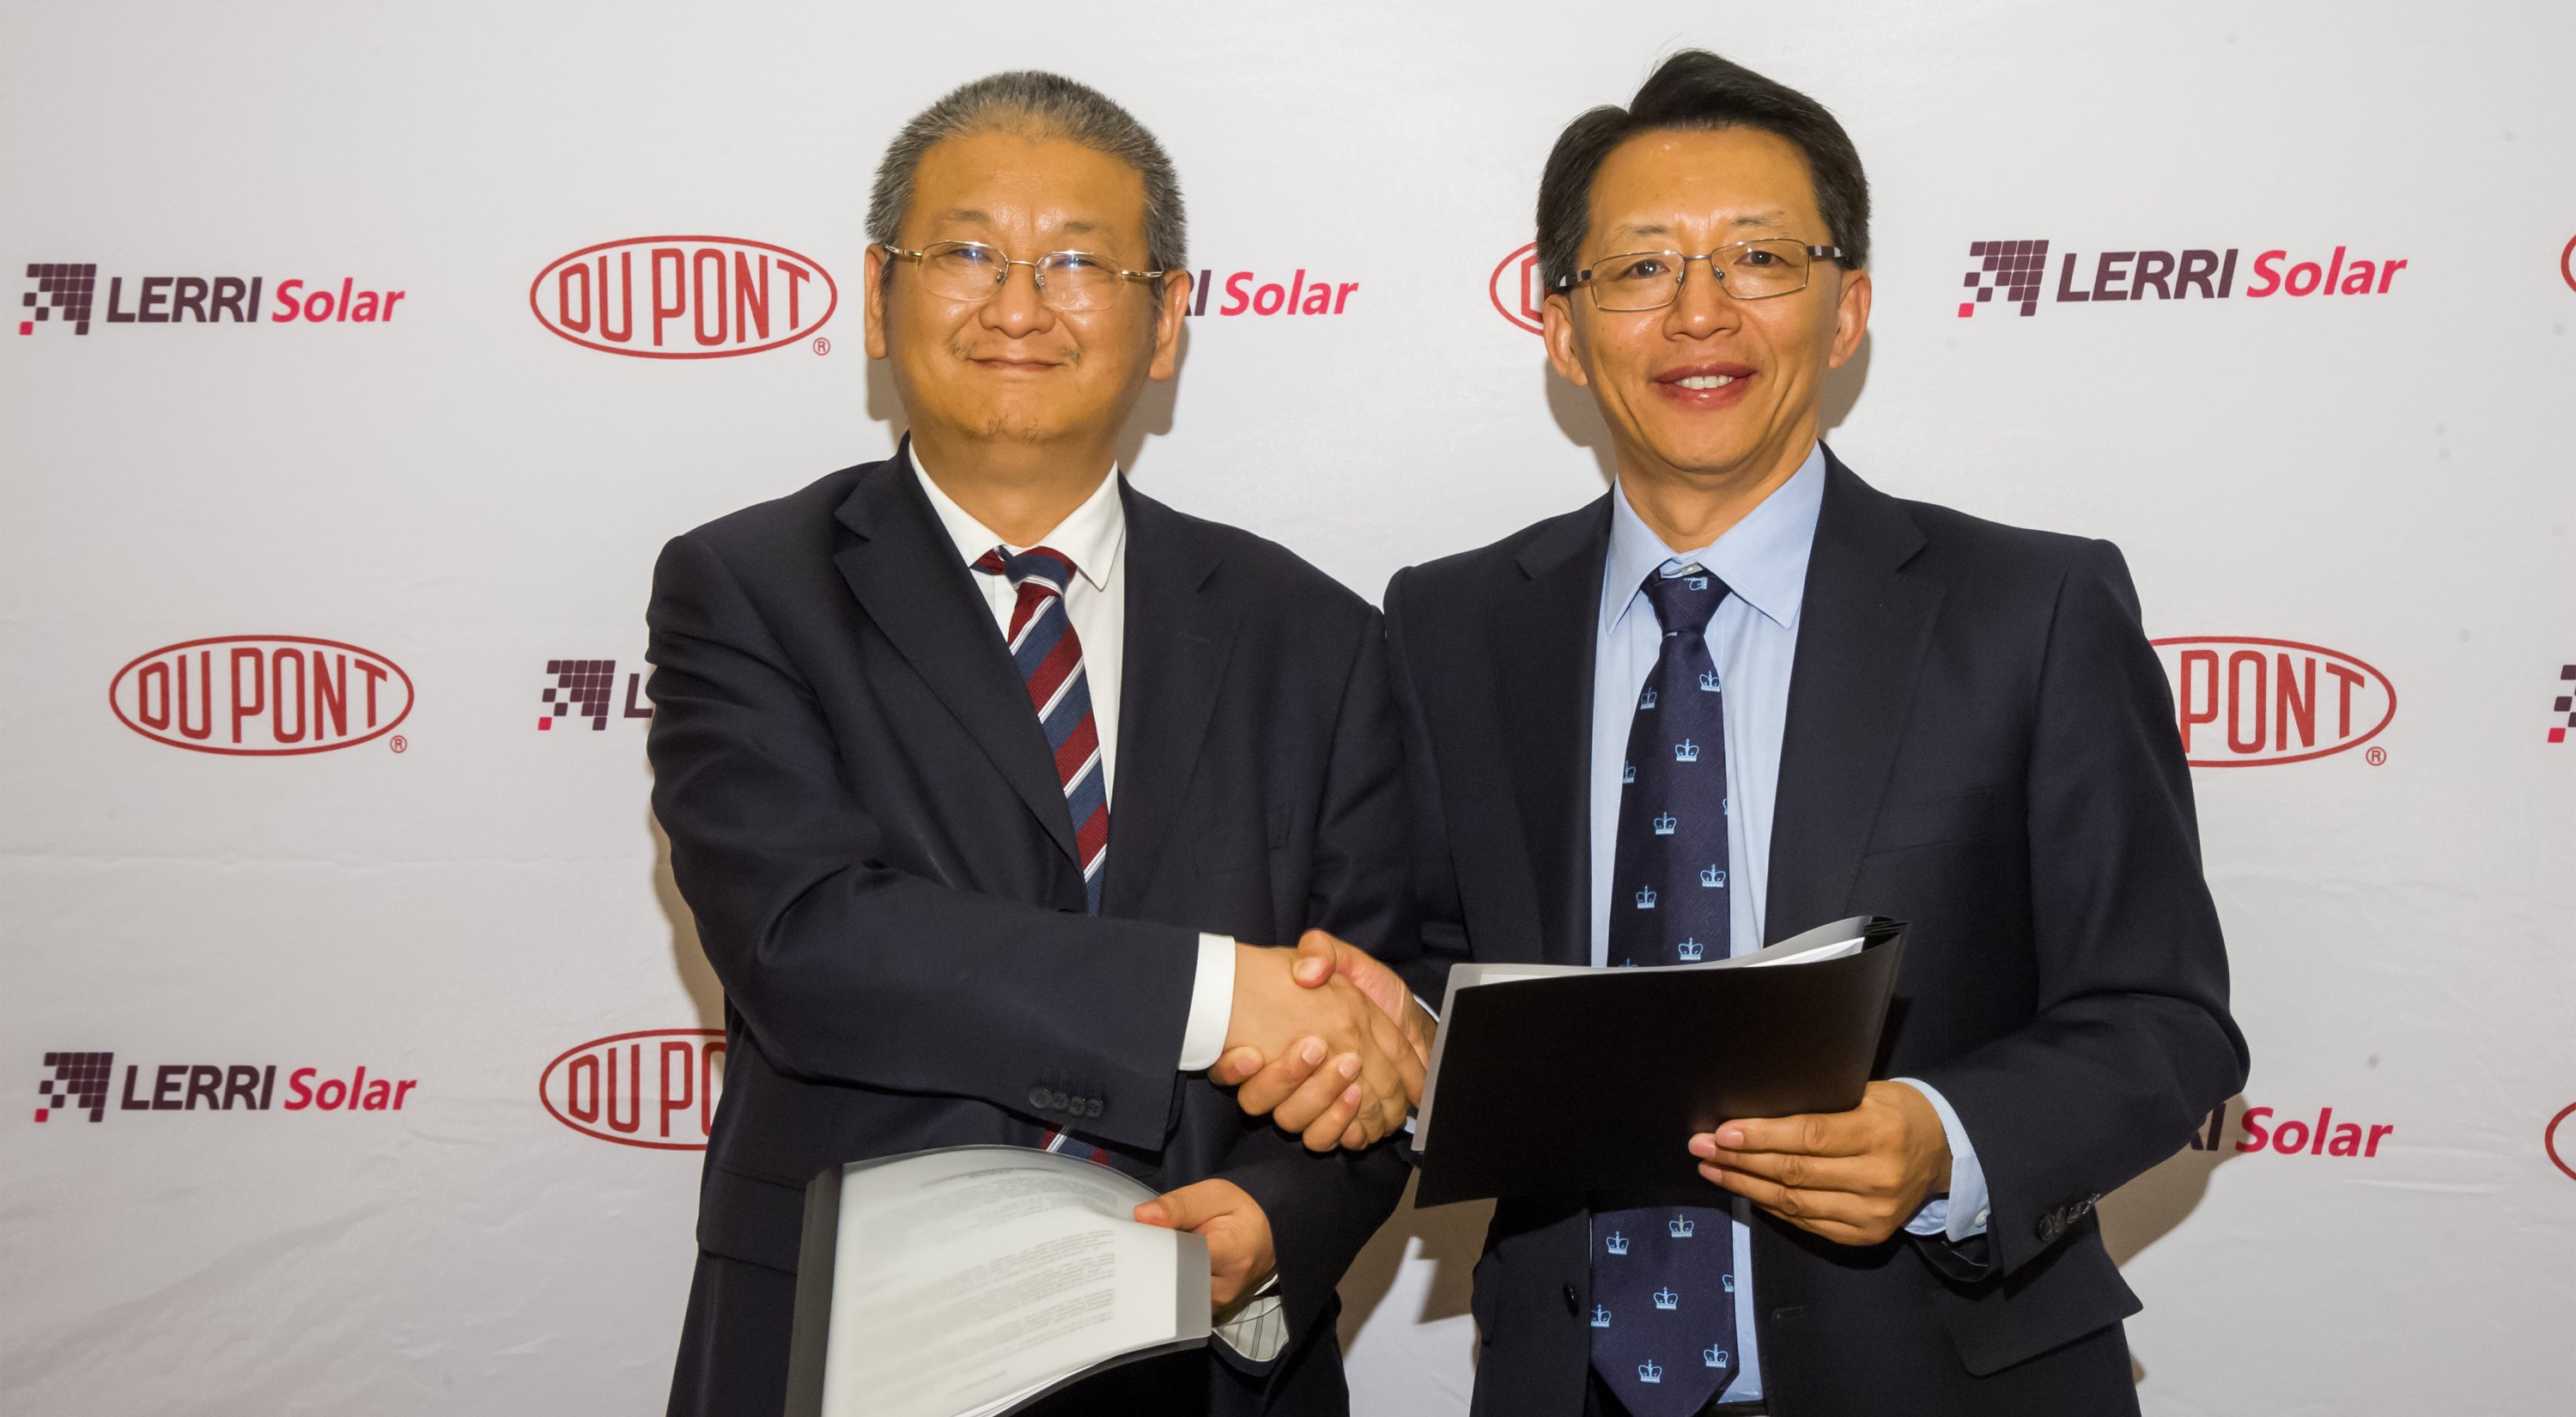 In Solar Power International, DuPont and LERRI Solar Have Signed a Strategic Collaboration Agreement